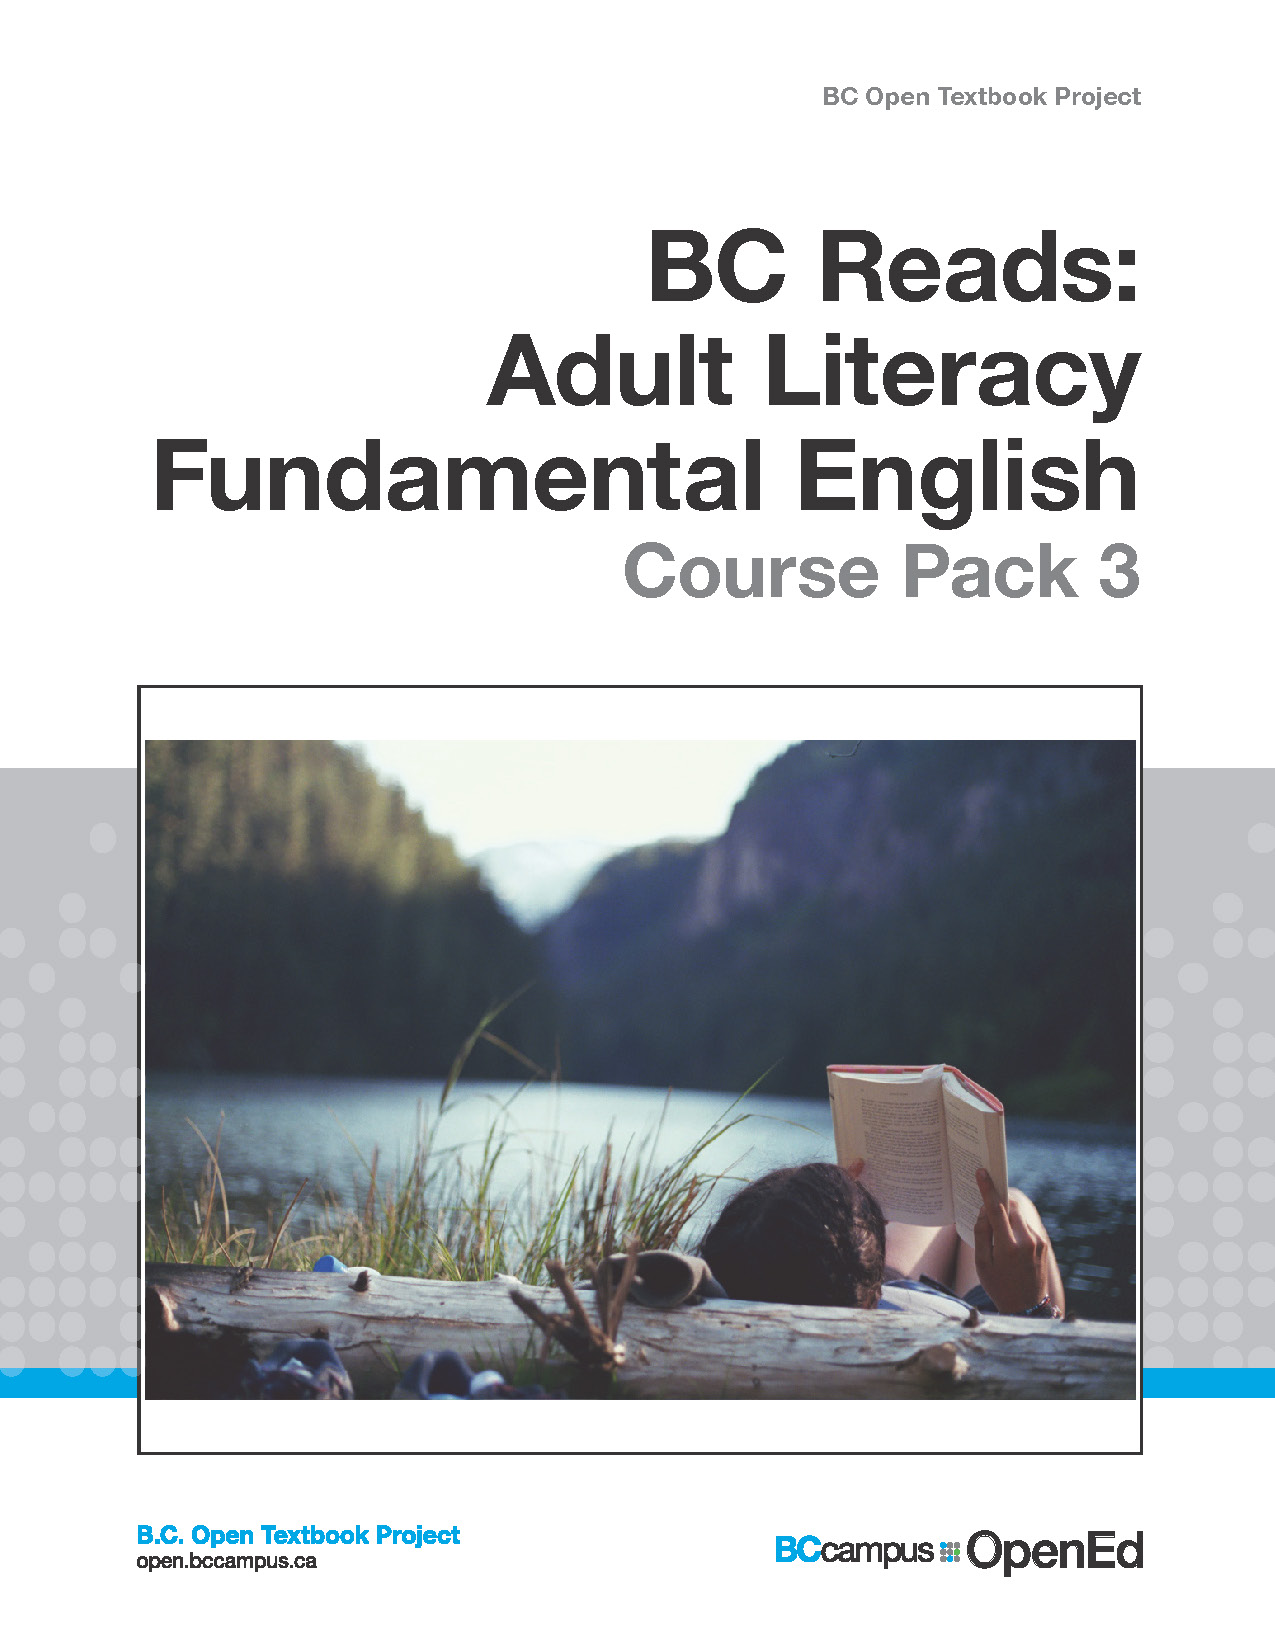 Cover image for Adult Literacy Fundamental English - Course Pack 3